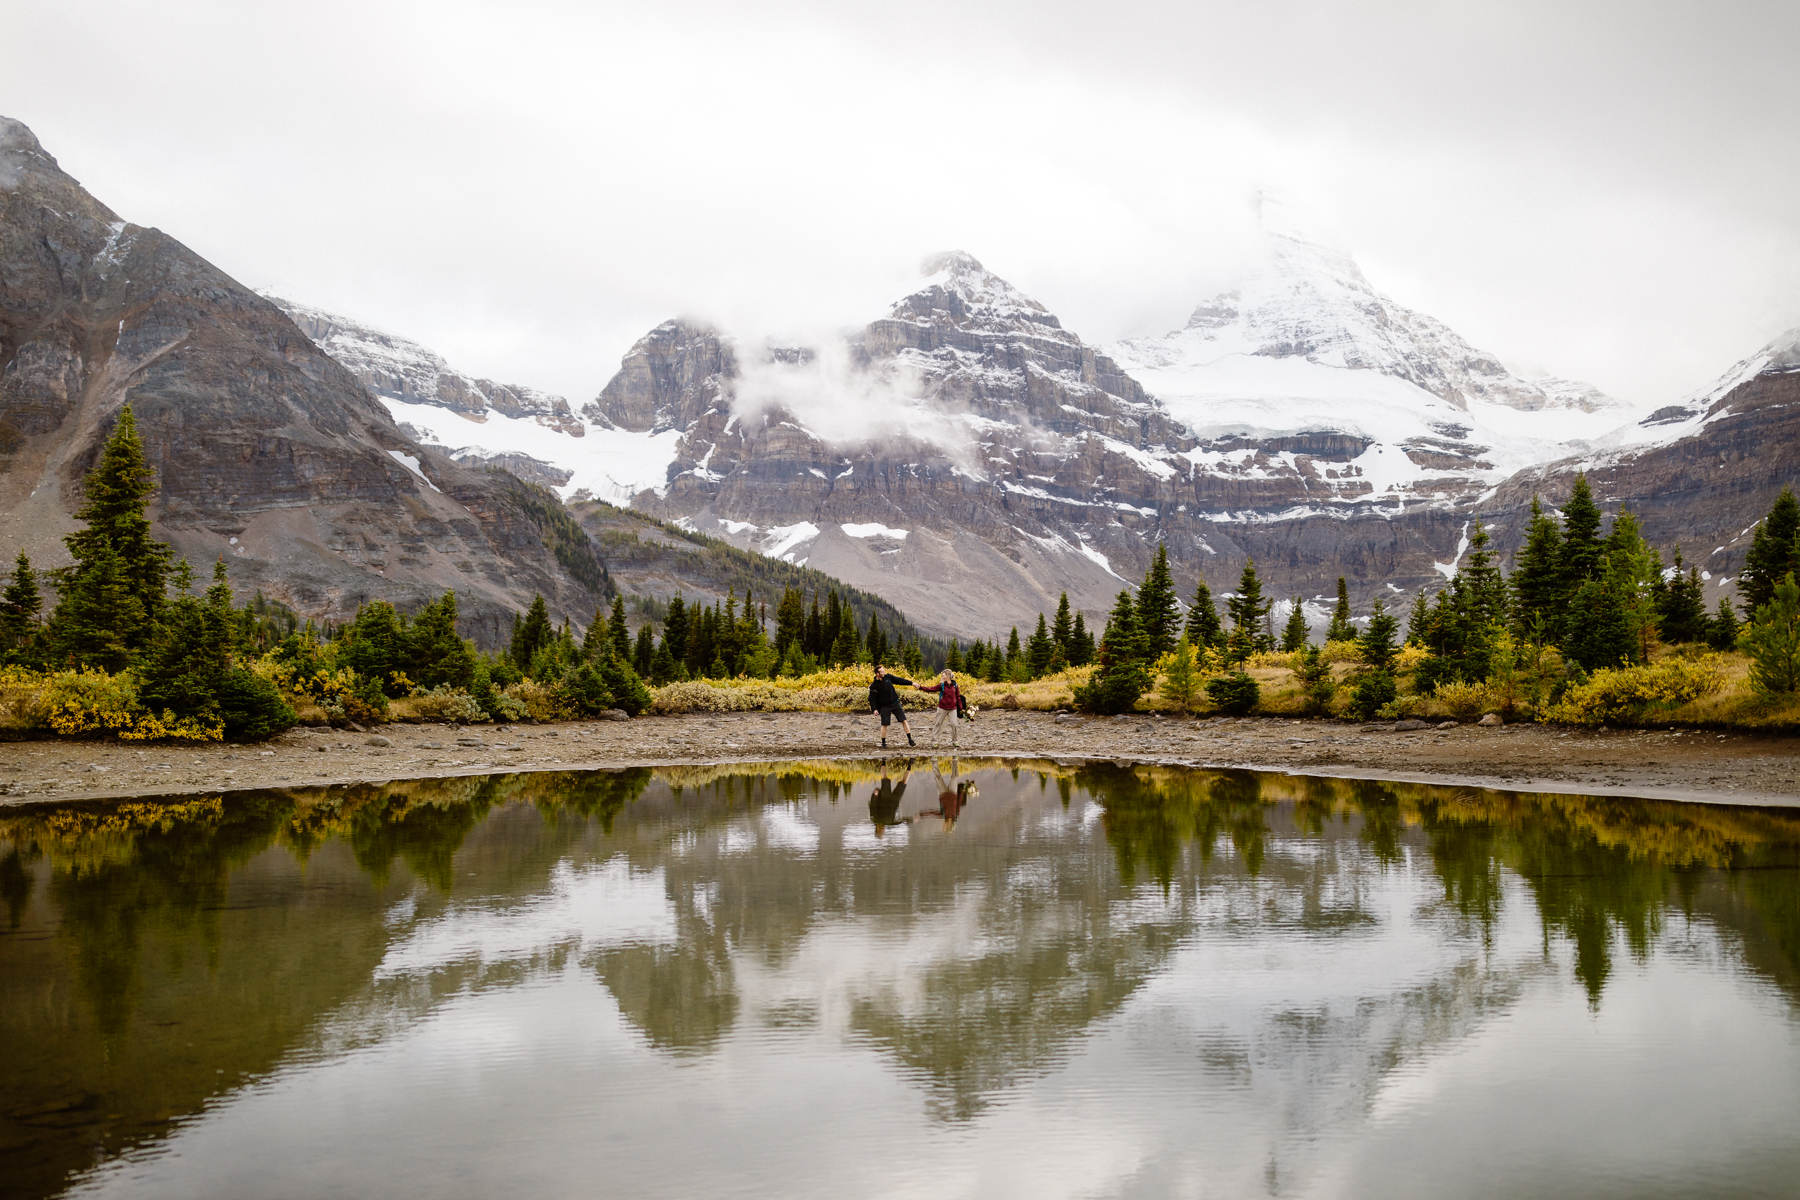 Mount Assiniboine Elopement Photographers at a Backcountry Lodge - Photo 18